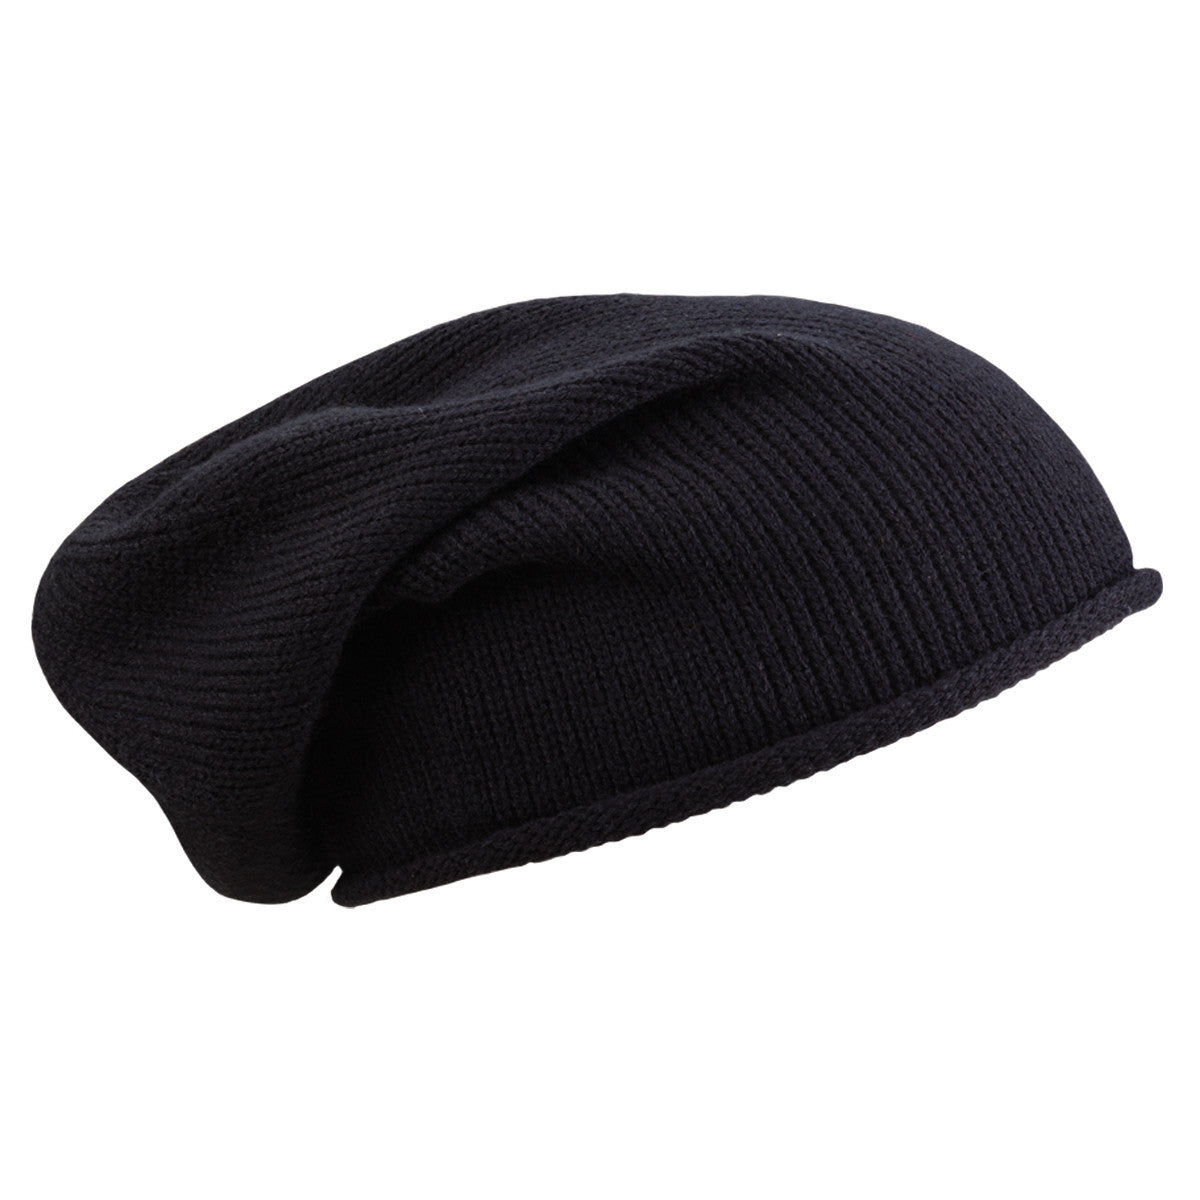 Sportsman Oversized Beanie – Just Say Hats